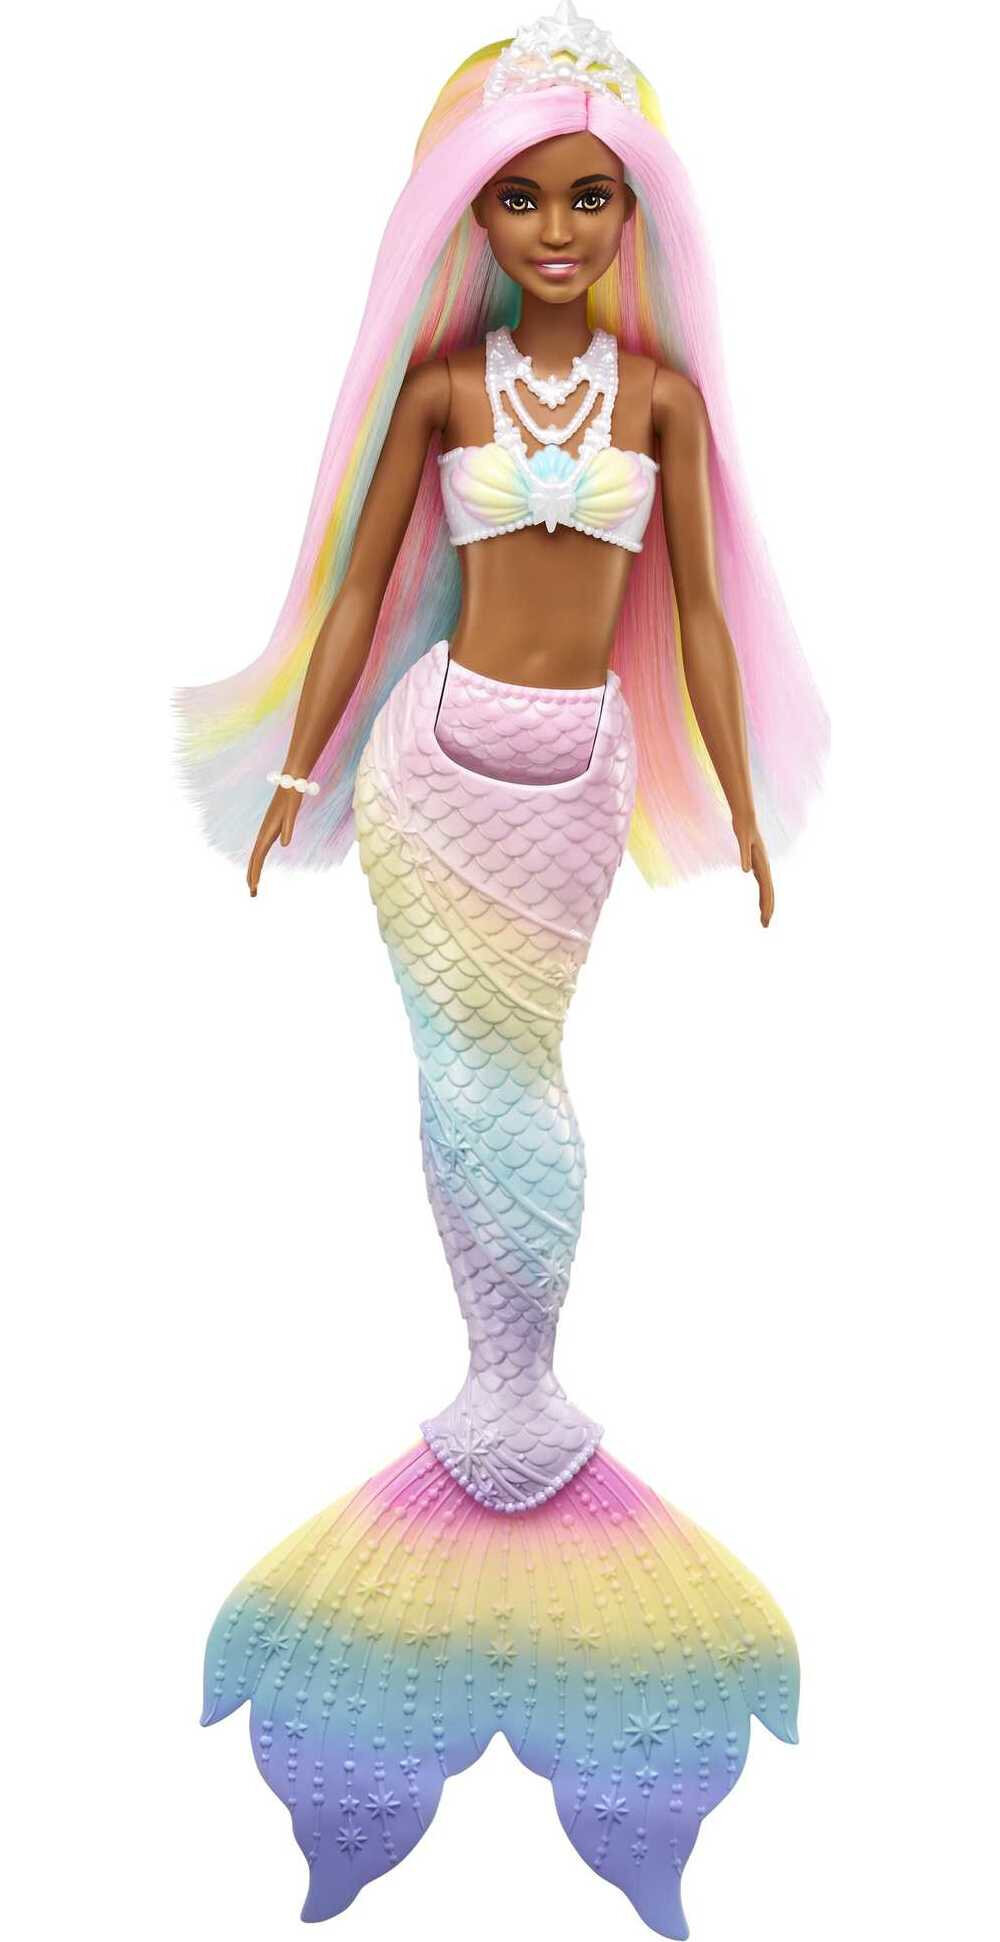 Barbie Dreamtopia Mermaid Doll with Rainbow Hair, Light Brown Eyes & Color-Change Feature - image 5 of 7